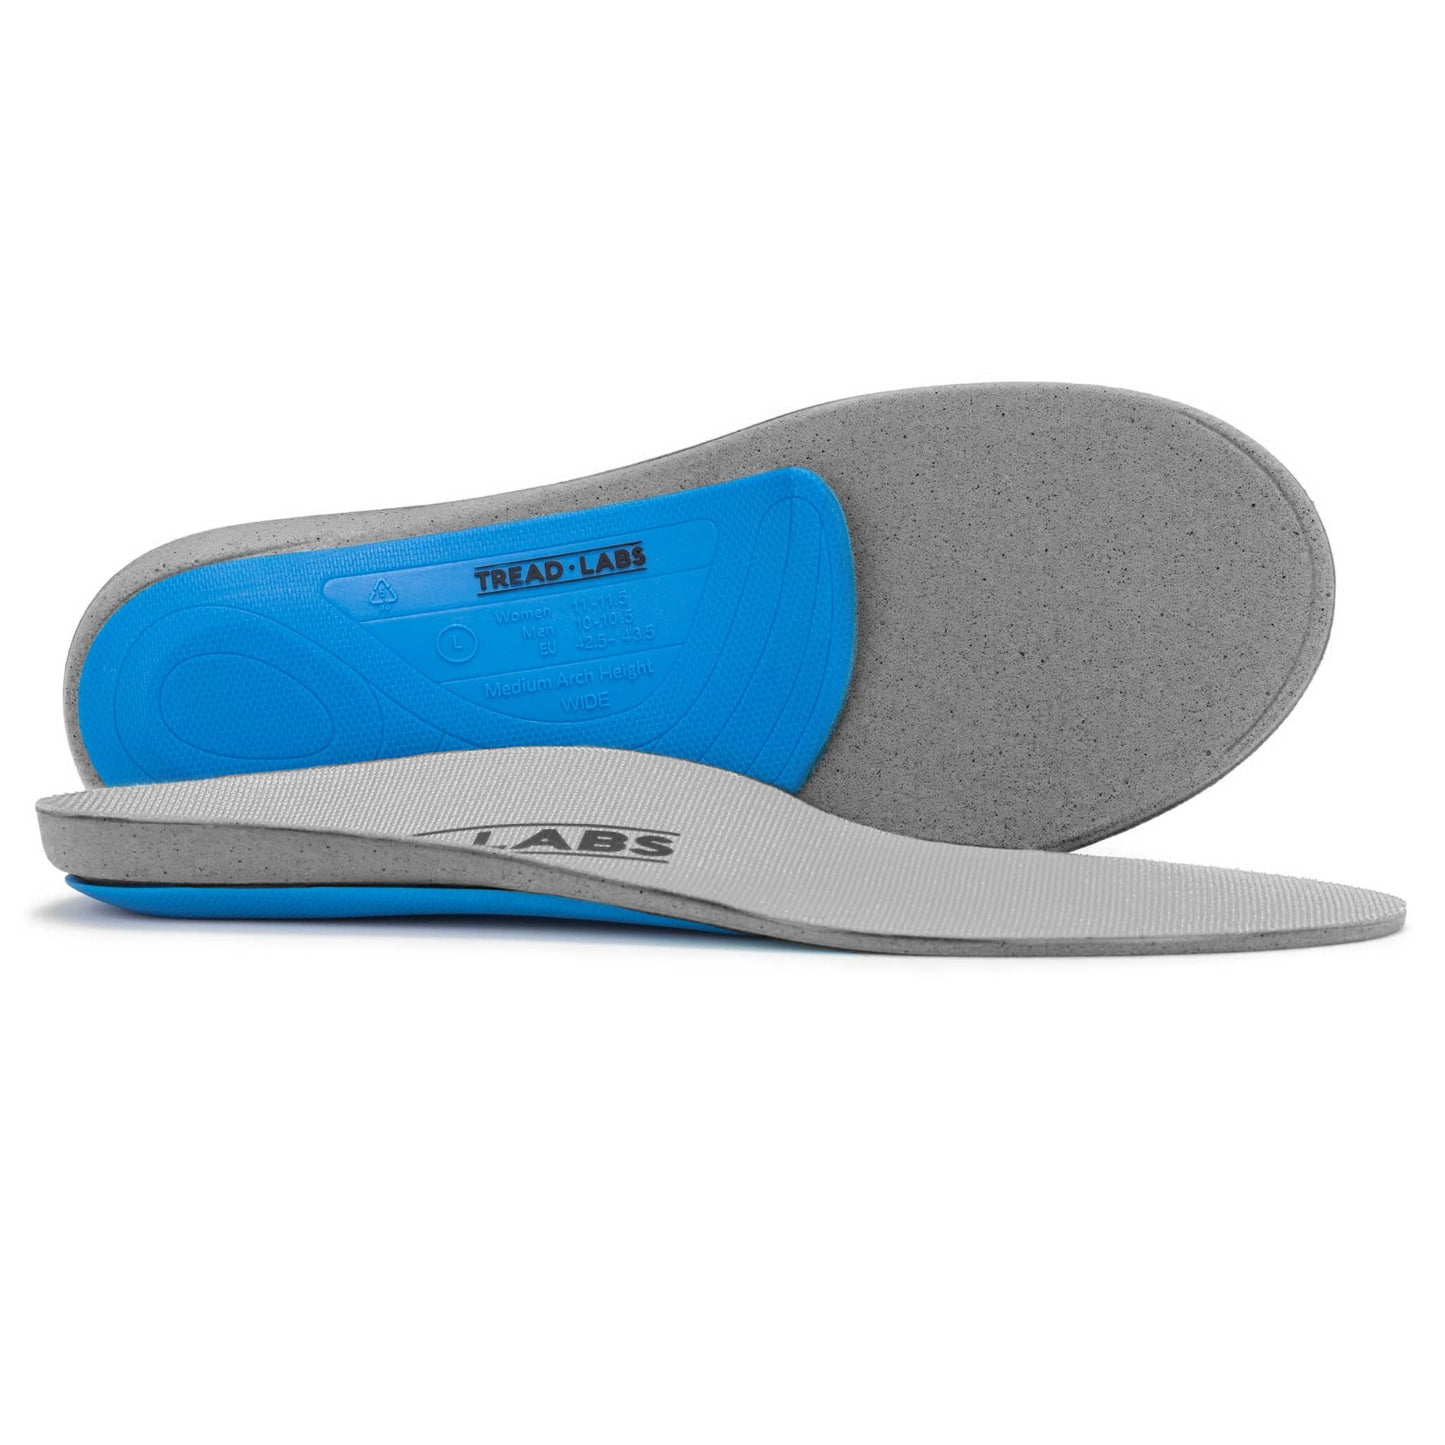 Refurbished Pace Wide Insoles- All Sales Final